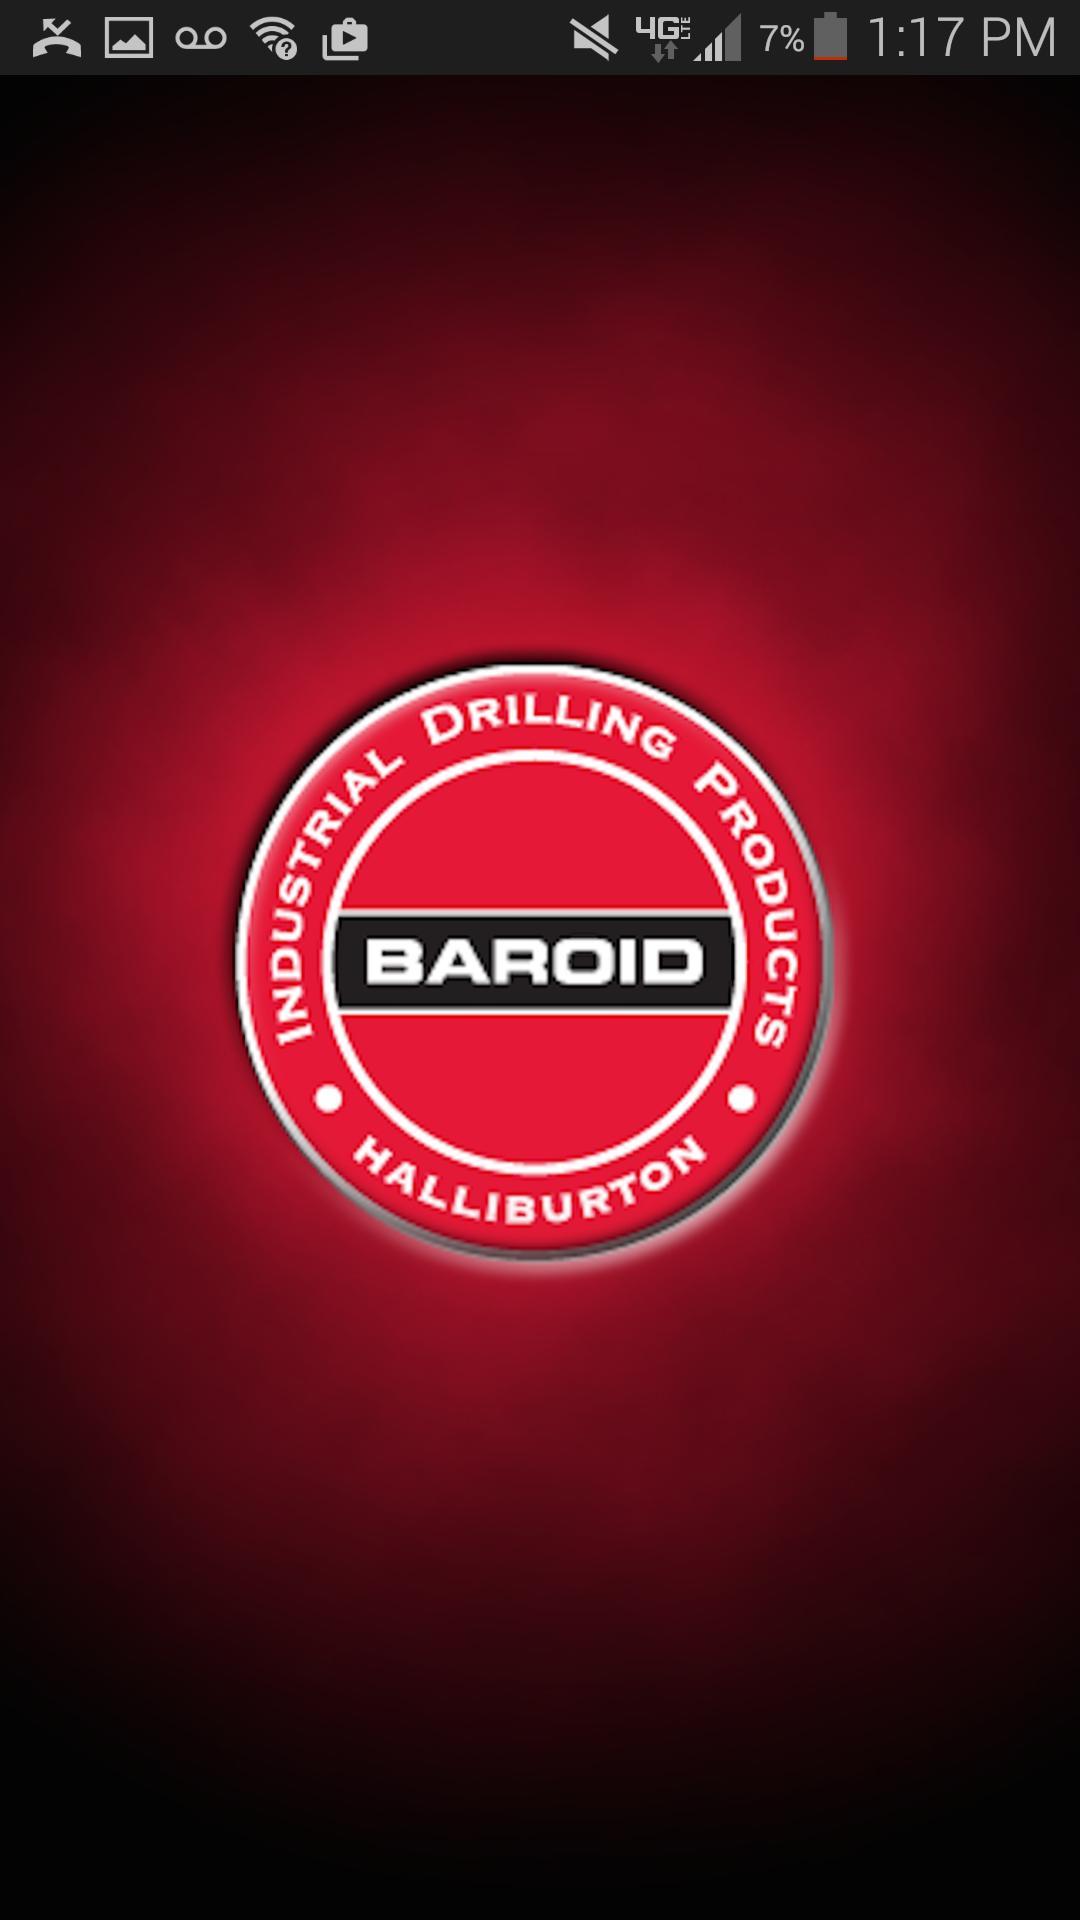 Baroid Logo - Baroid IDP for Android - APK Download